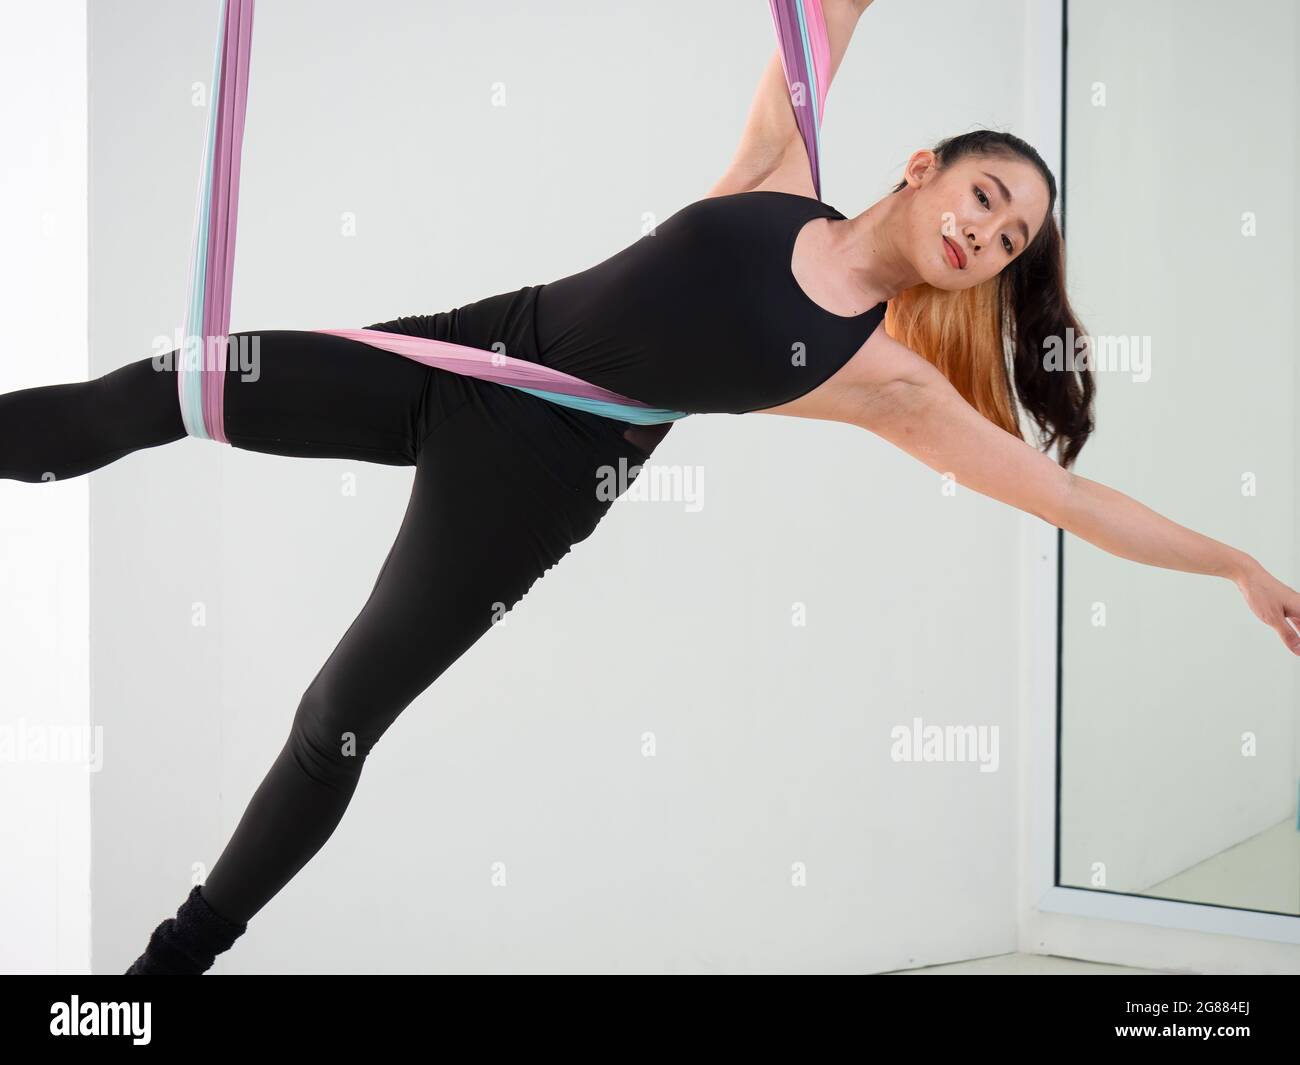 Young beautiful Asian dancer dressed in black color performing aerial dance with multi-color fabrics in the studio. Stock Photo